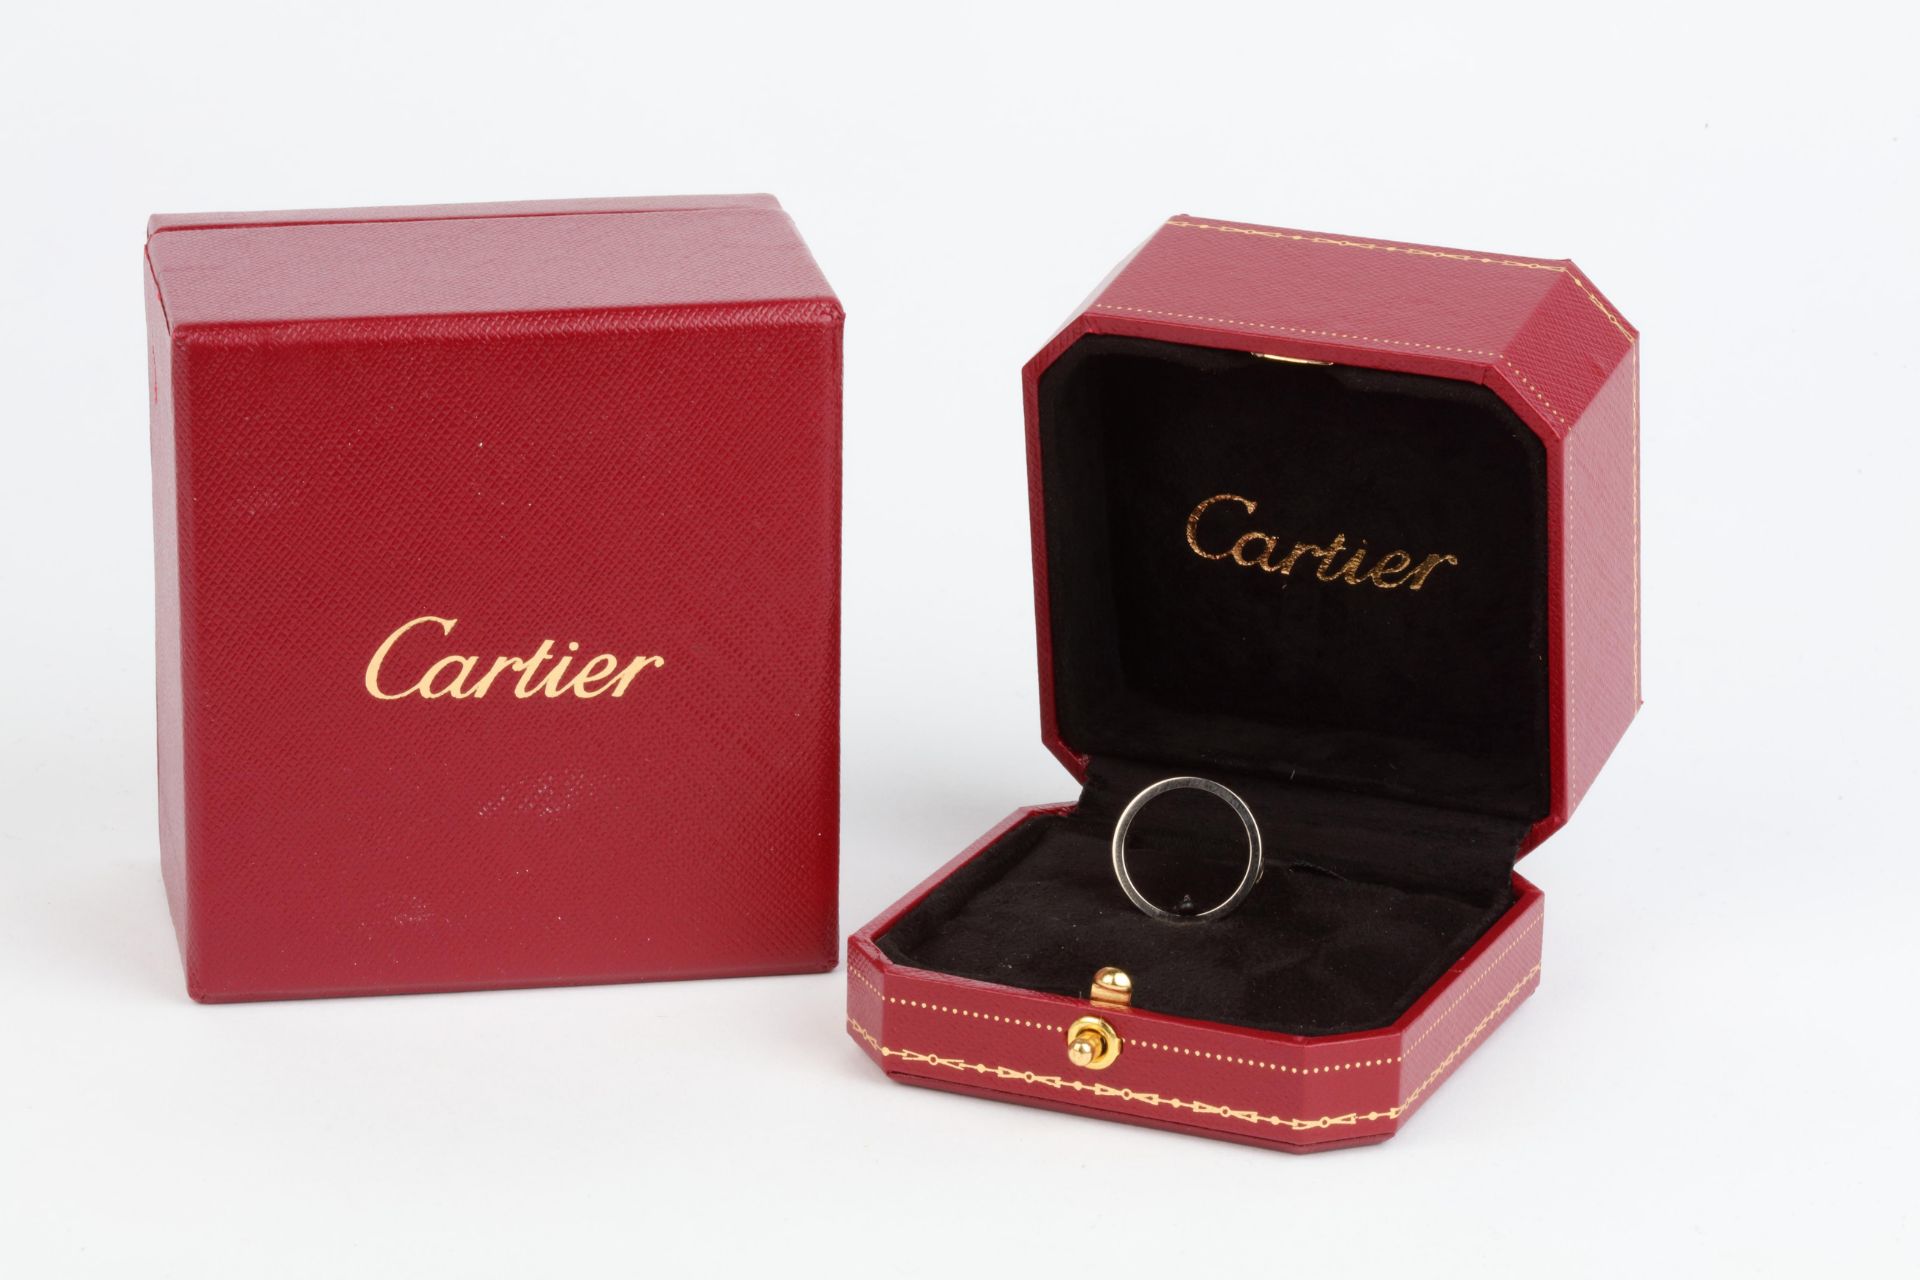 No VAT Cartier 18K White Gold Love Ring - Comes With Box - Image 3 of 3